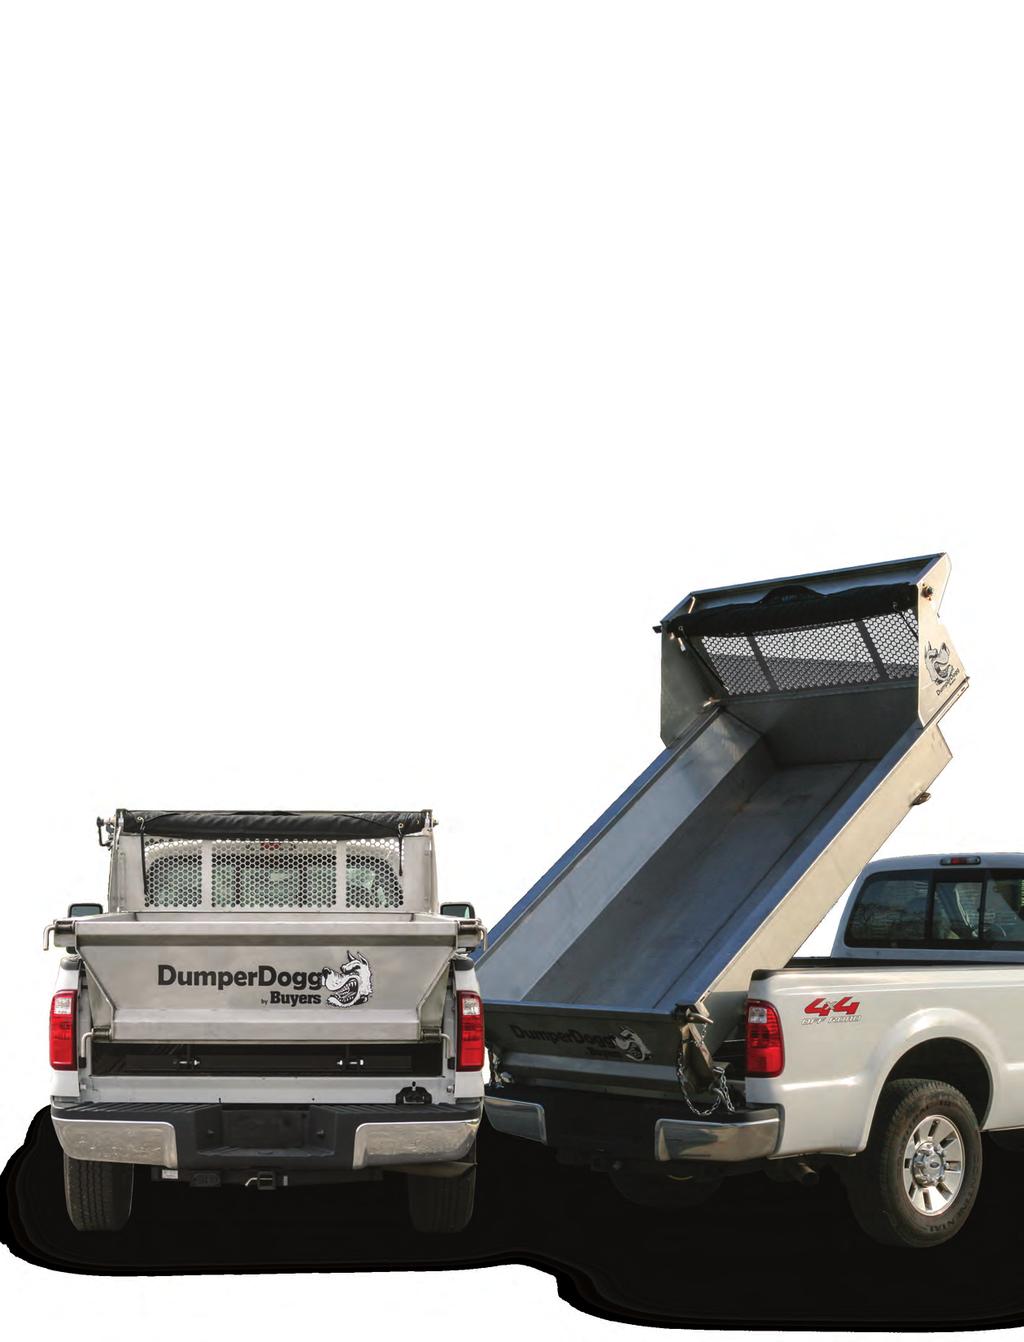 DumperDogg Stainless Steel Dump Inserts 5534000-8' Stainless steel insert 5534006-6' Stainless steel insert STANDARD FEATURES Fits most 8' and 6' beds 4-1/2" x 8" Power up and power down